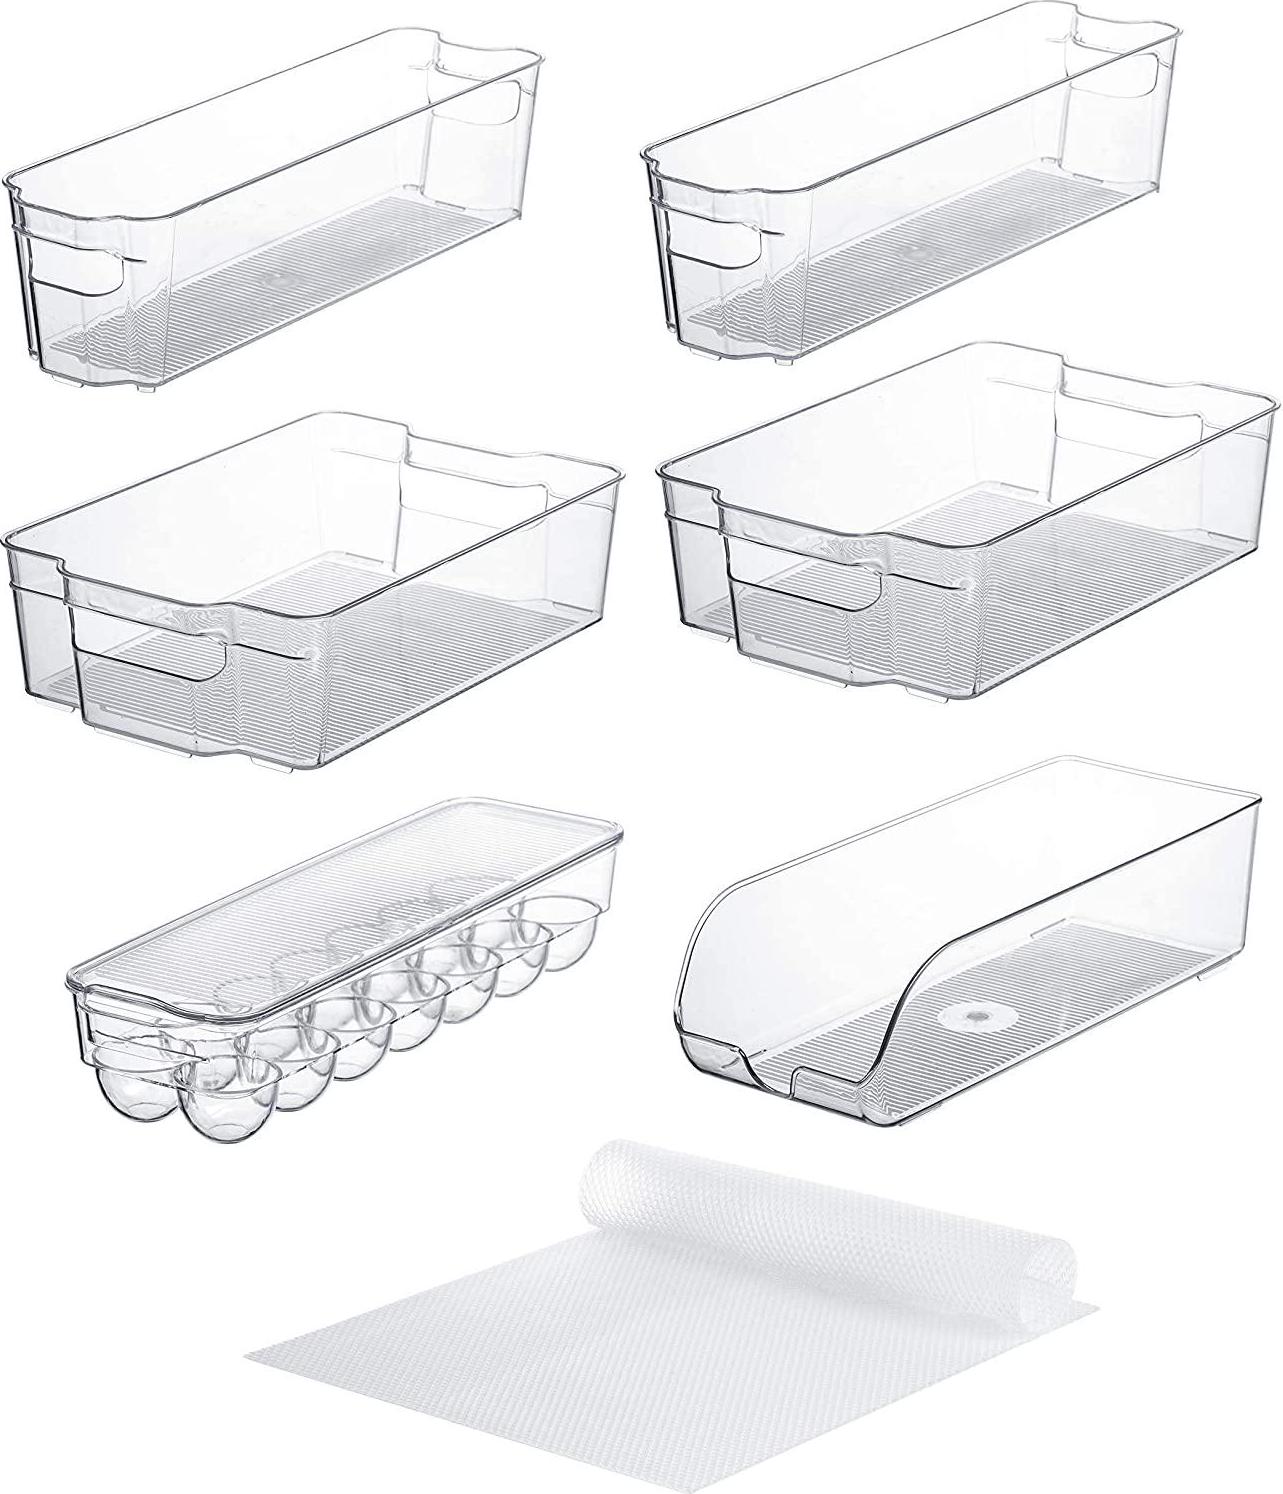 1 Sagler, fridge bins and organizers Set of 10 - Stackable refrigerator bins set includes 6 bins for food containers and 4 shelf liners for fridge shelf's